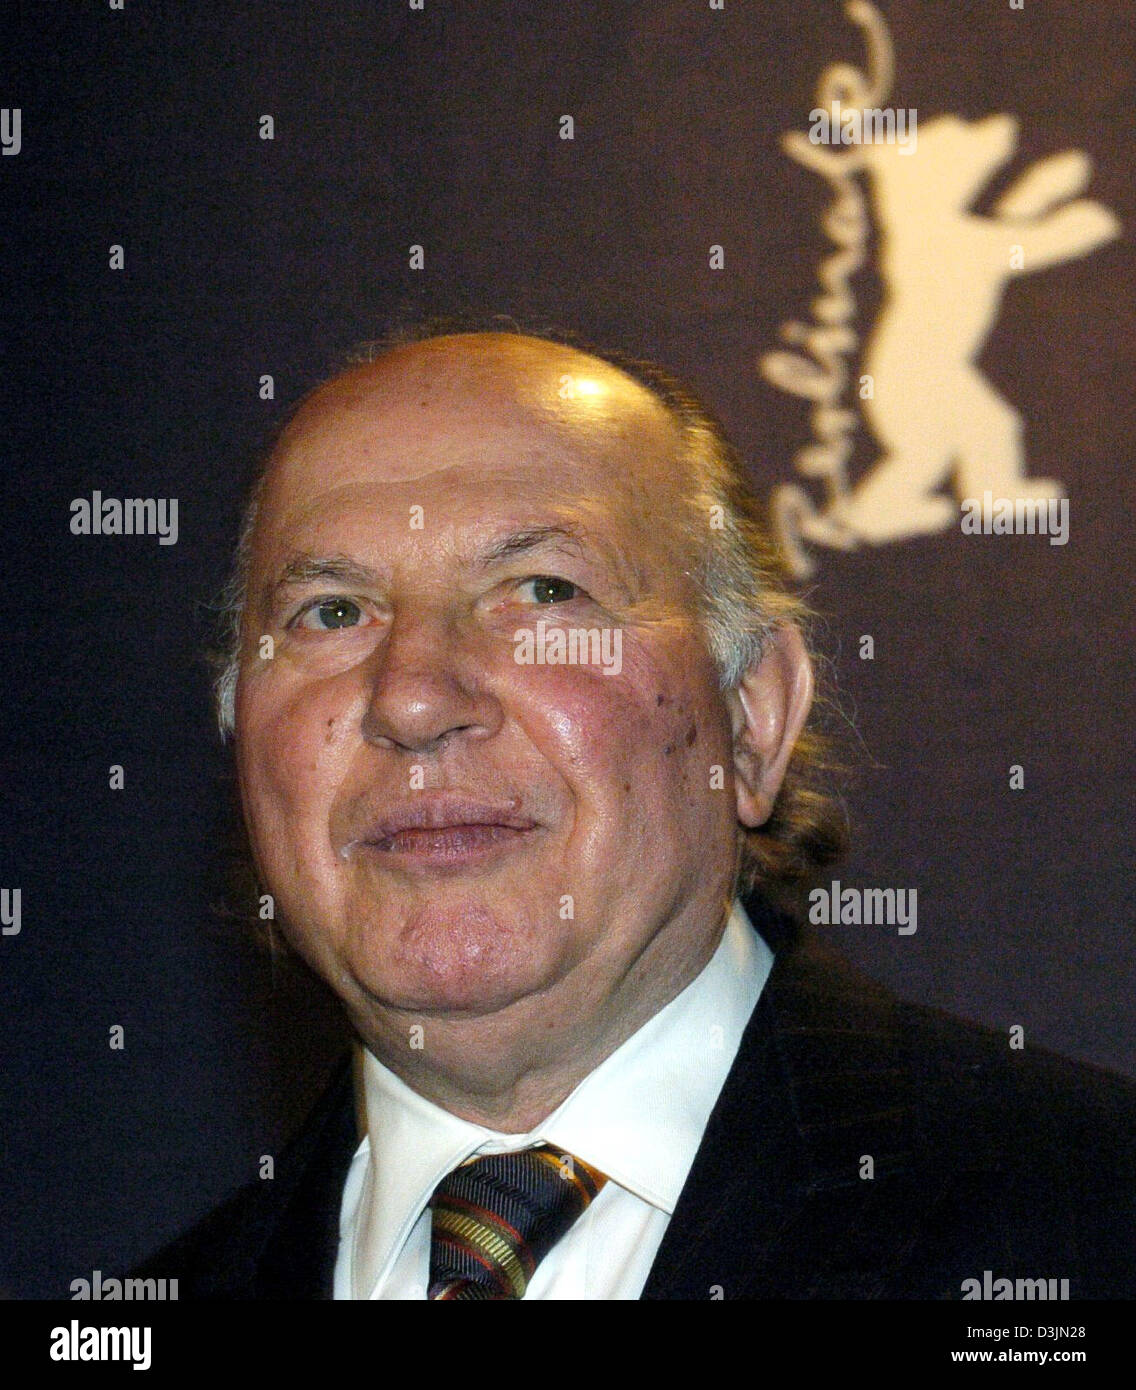 (dpa) - Imre Kertesz, Nobel Prize winner for Literature and screenplay writer, arrives for the presentation of the film 'Fateless' (Hungary) during the 55th Berlinale international film festival in Berlin, Germany, 15 February 2005. Stock Photo